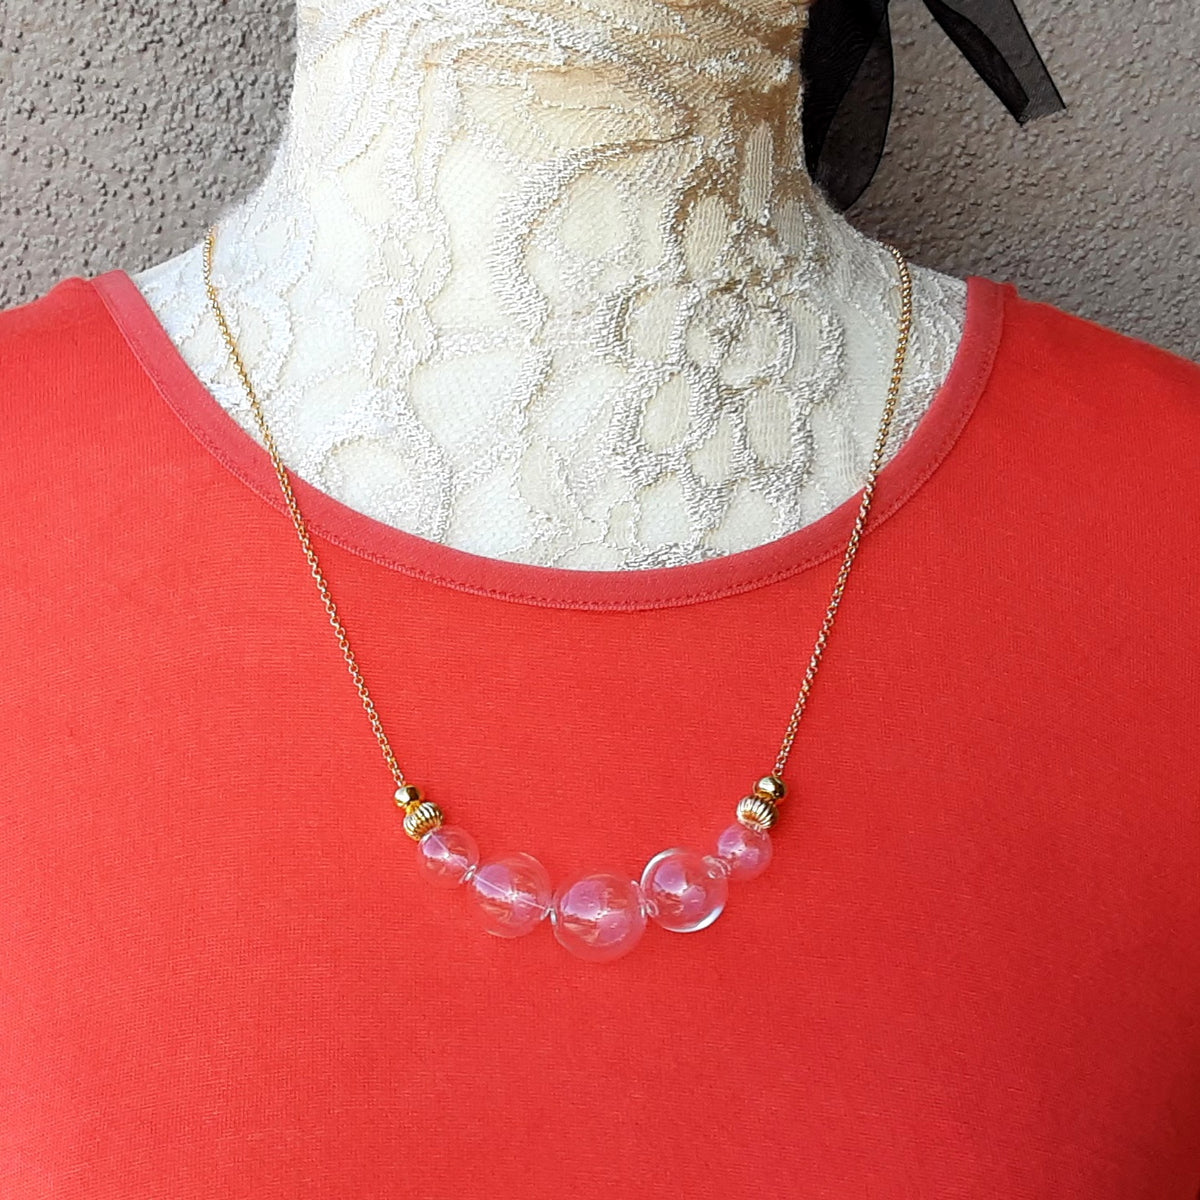 Hand Blown Glass Bubble Necklace, Glass Sterling Silver or Gold Plated Jewelry, Modern Sautoir